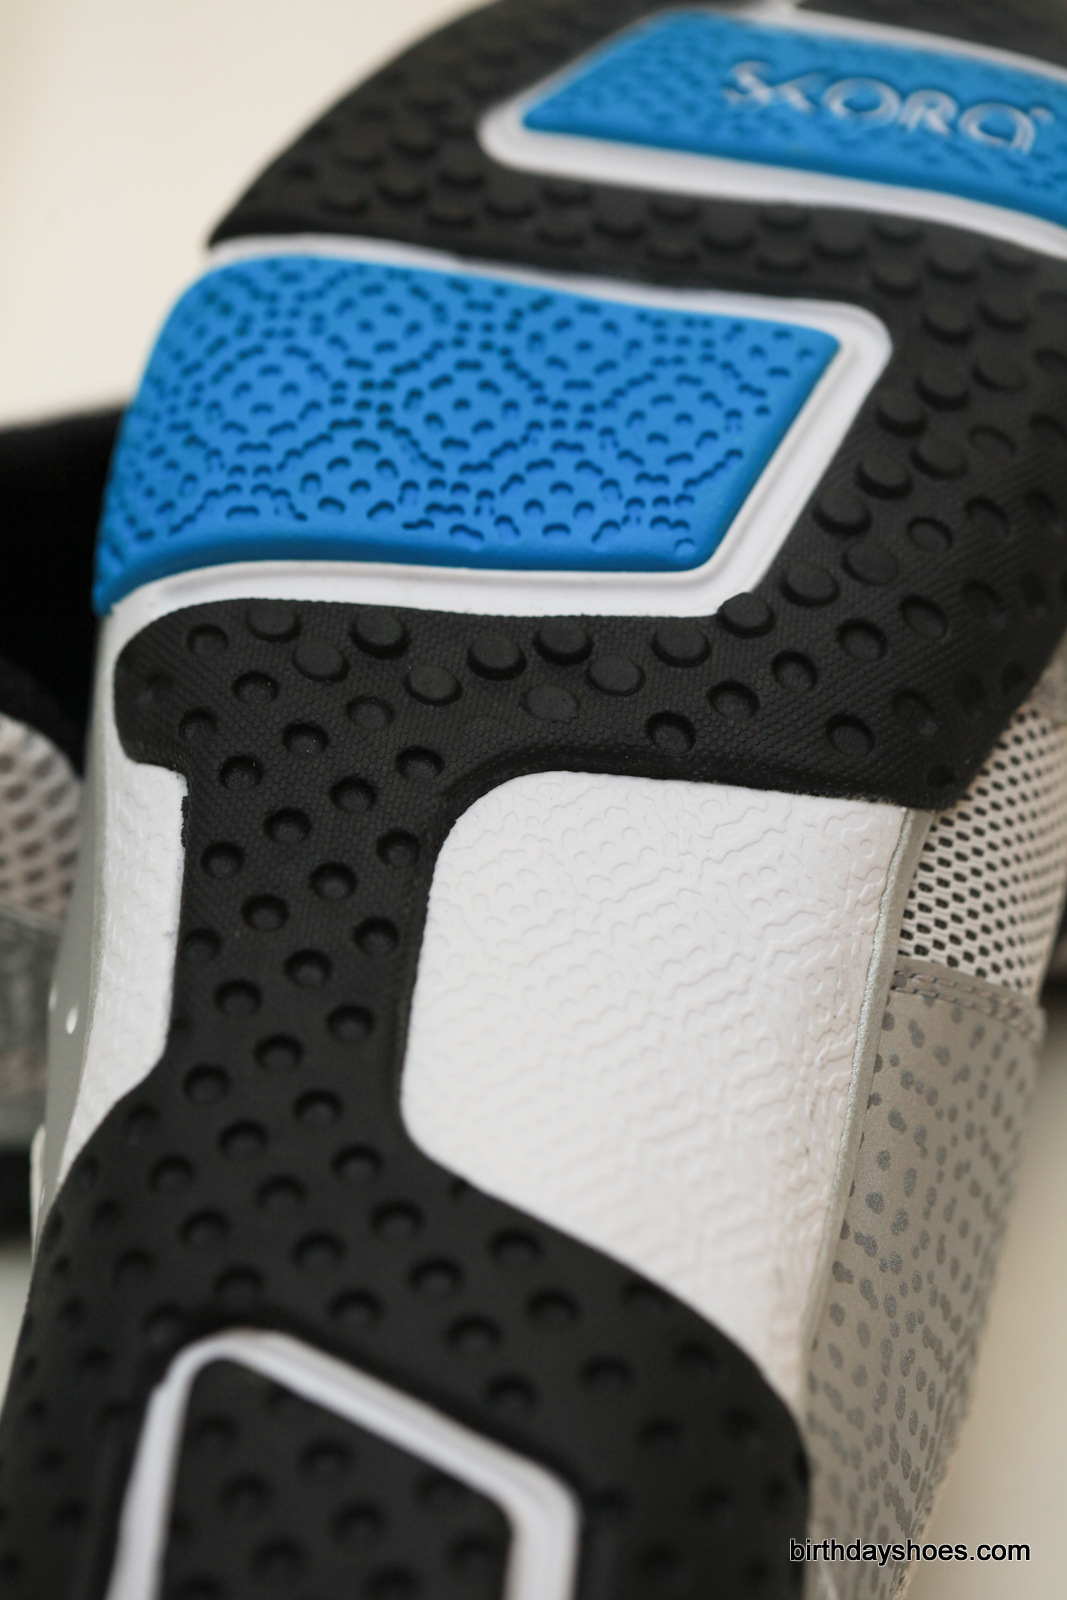 The outsole of both the Skora Form and Skora Base is effectively the same.